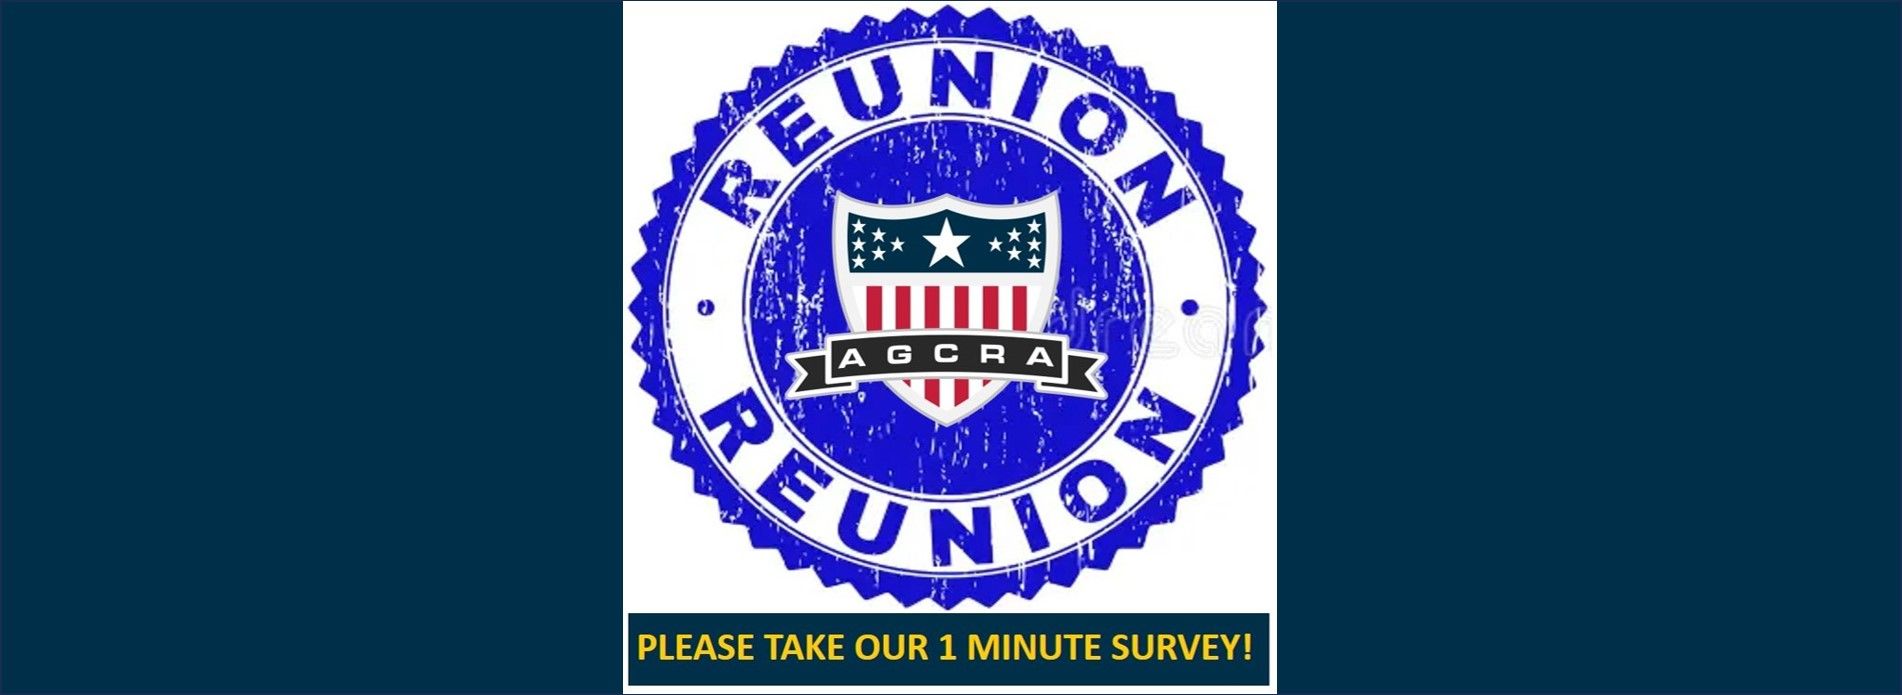 1-Minute Survey Request for the New Emerging AGCRA Reunion Event